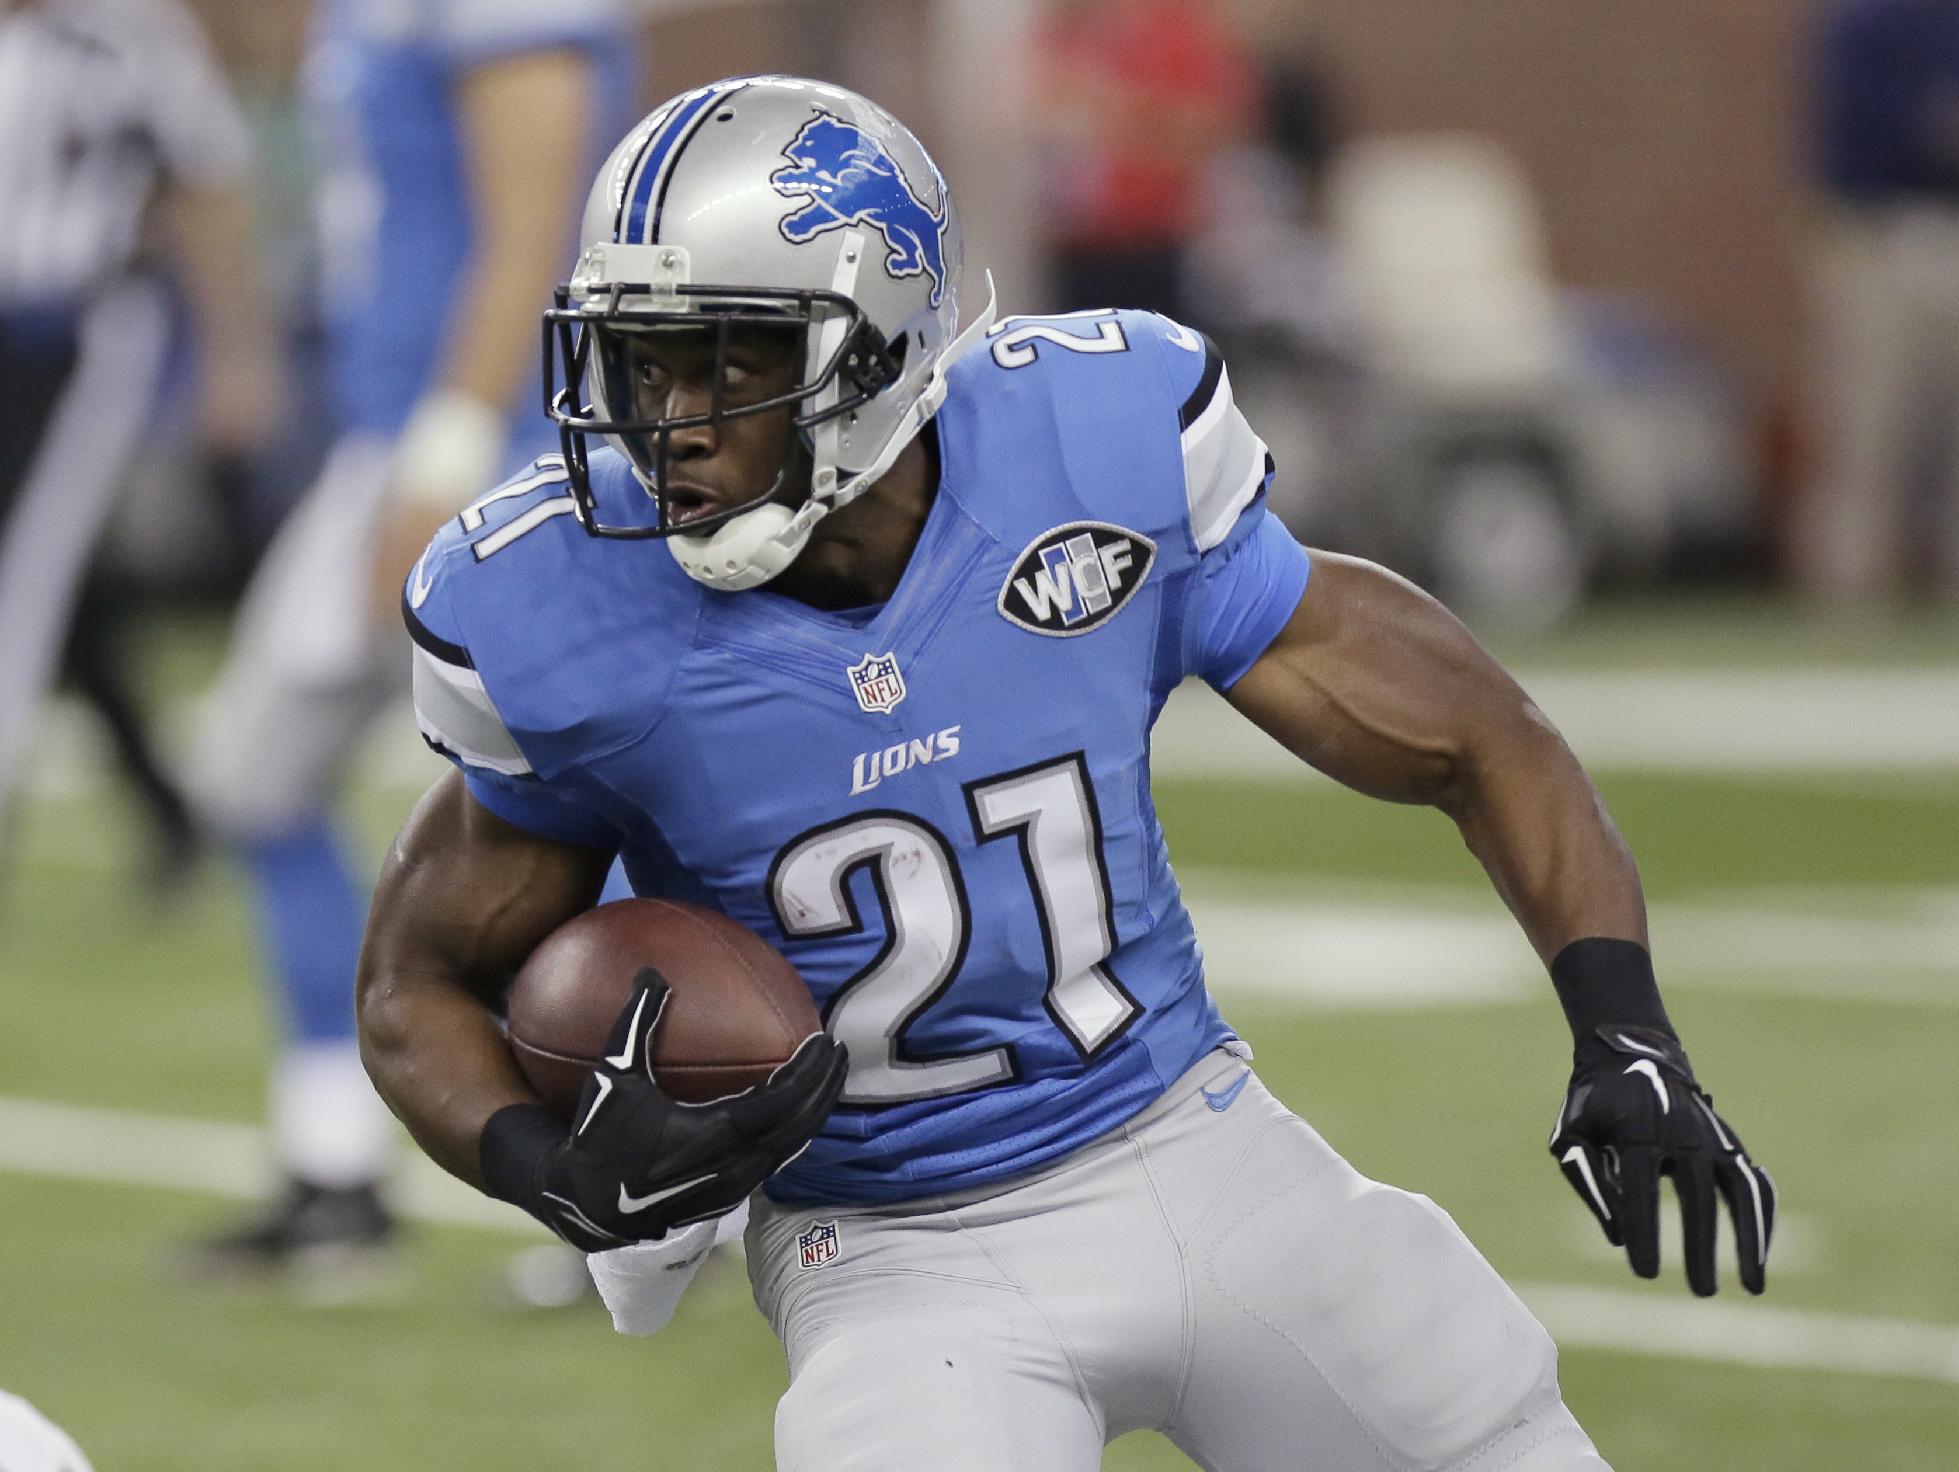 FILE - In this Oct. 29, 2014, file photo, Detroit Lions running back Reggie Bush carries the ball against the New Orleans Saints during an NFL football game in Detroit. The Lions released Bush on Wednesday, Feb. 25, 2015, halfway through the four-year deal he signed as a free agent before the 2013 season. (AP Photo/Duane Burleson, File)